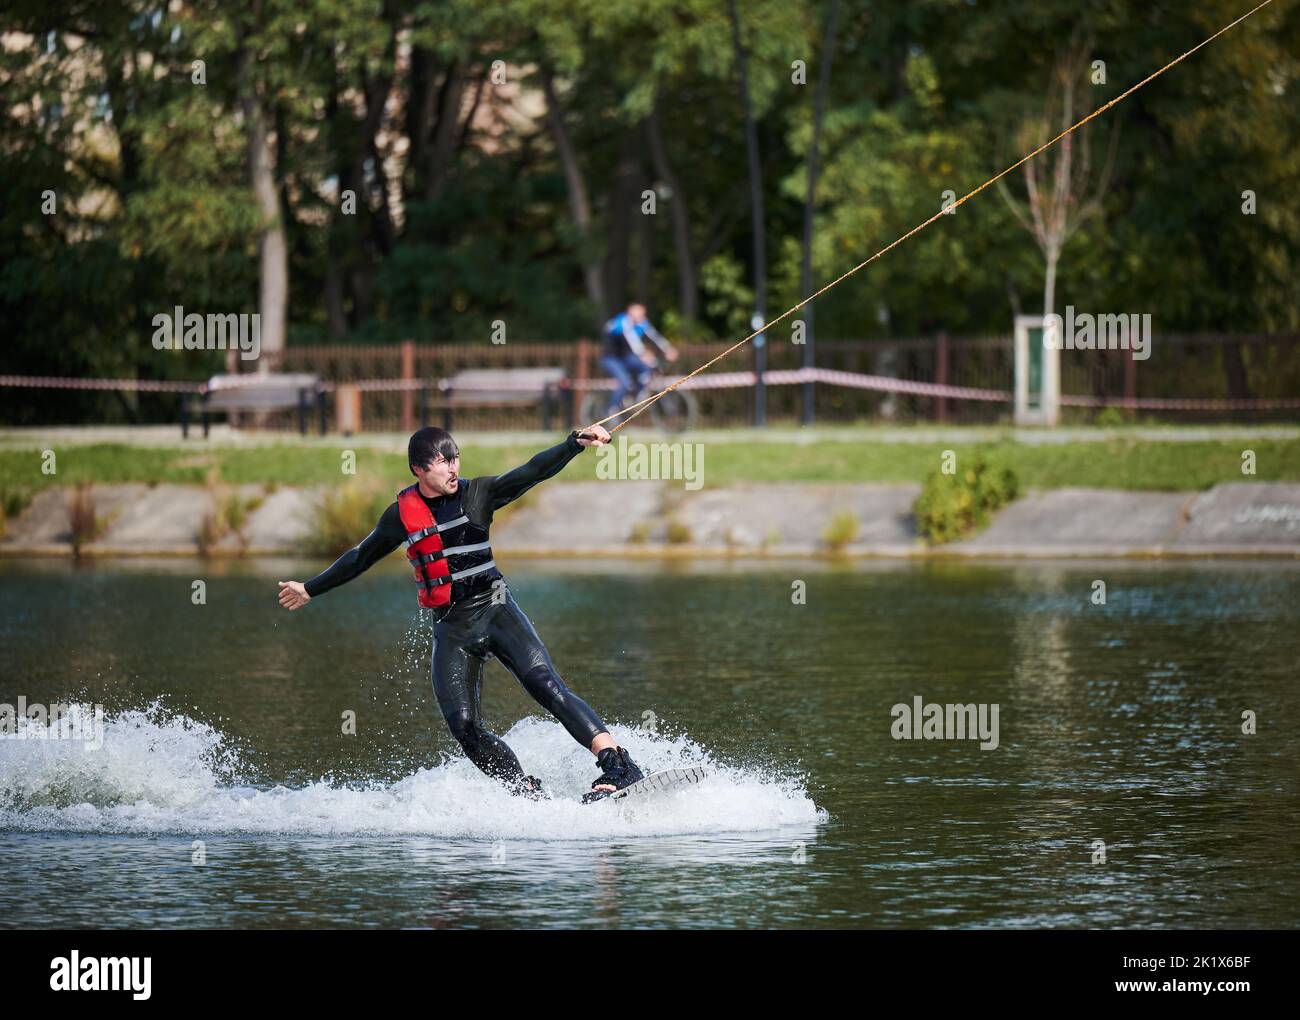 Wakeboarder surfing on lake. Young man surfer having fun wakeboarding in the cable park. Water sport, outdoor activity concept. Stock Photo